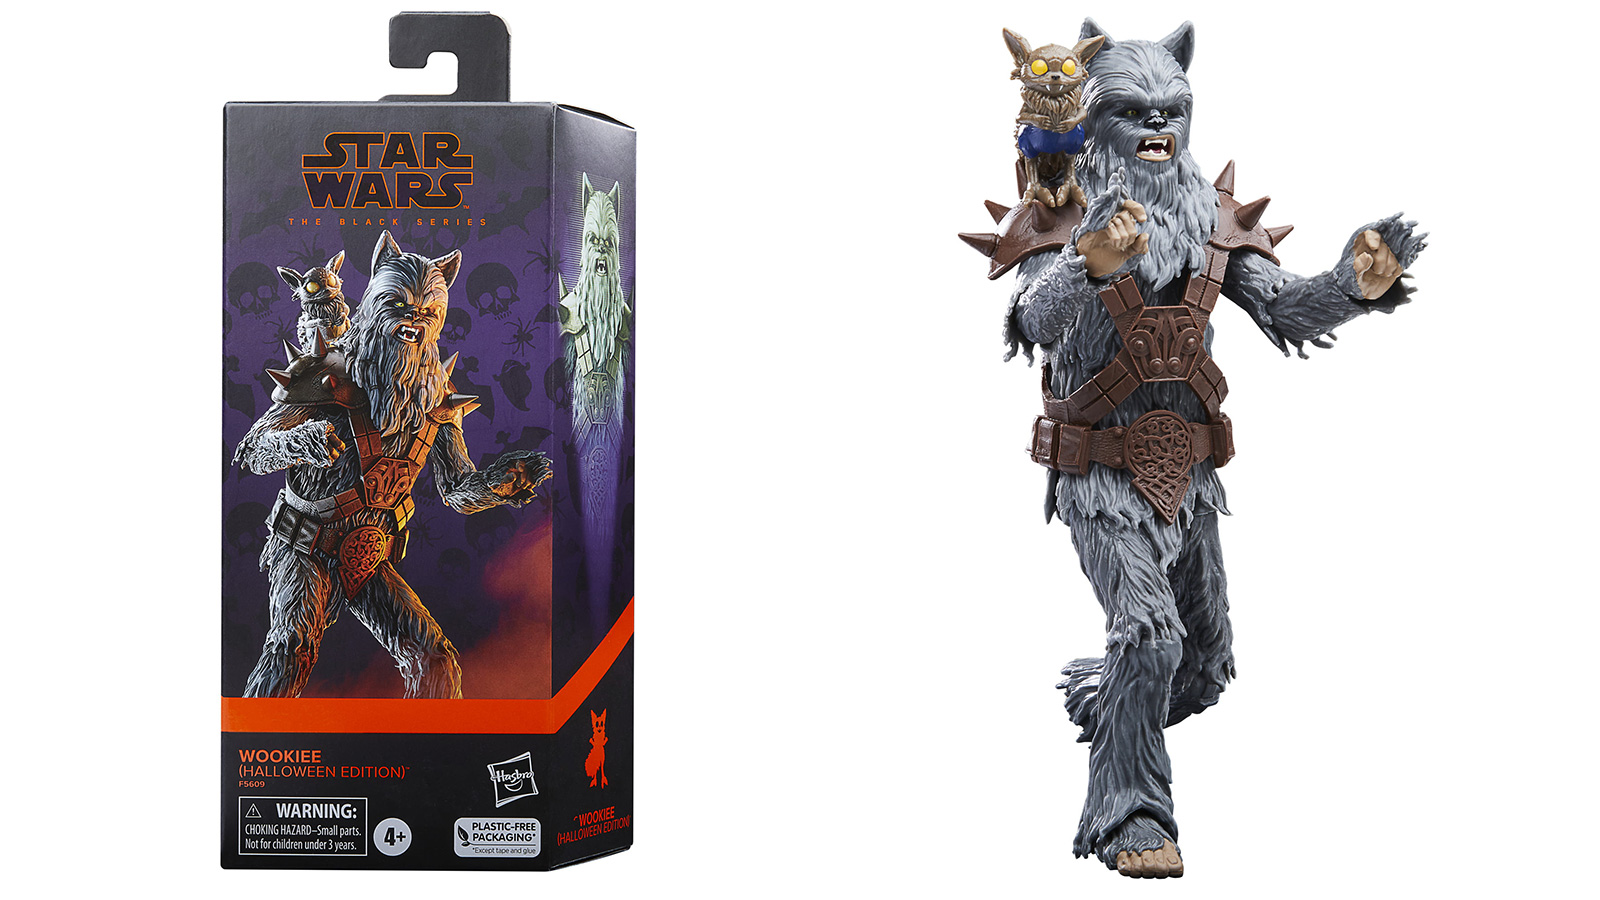 Preorder At Entertainment Earth - Exclusive The Black Series 6-Inch Wookiee (Halloween Edition)